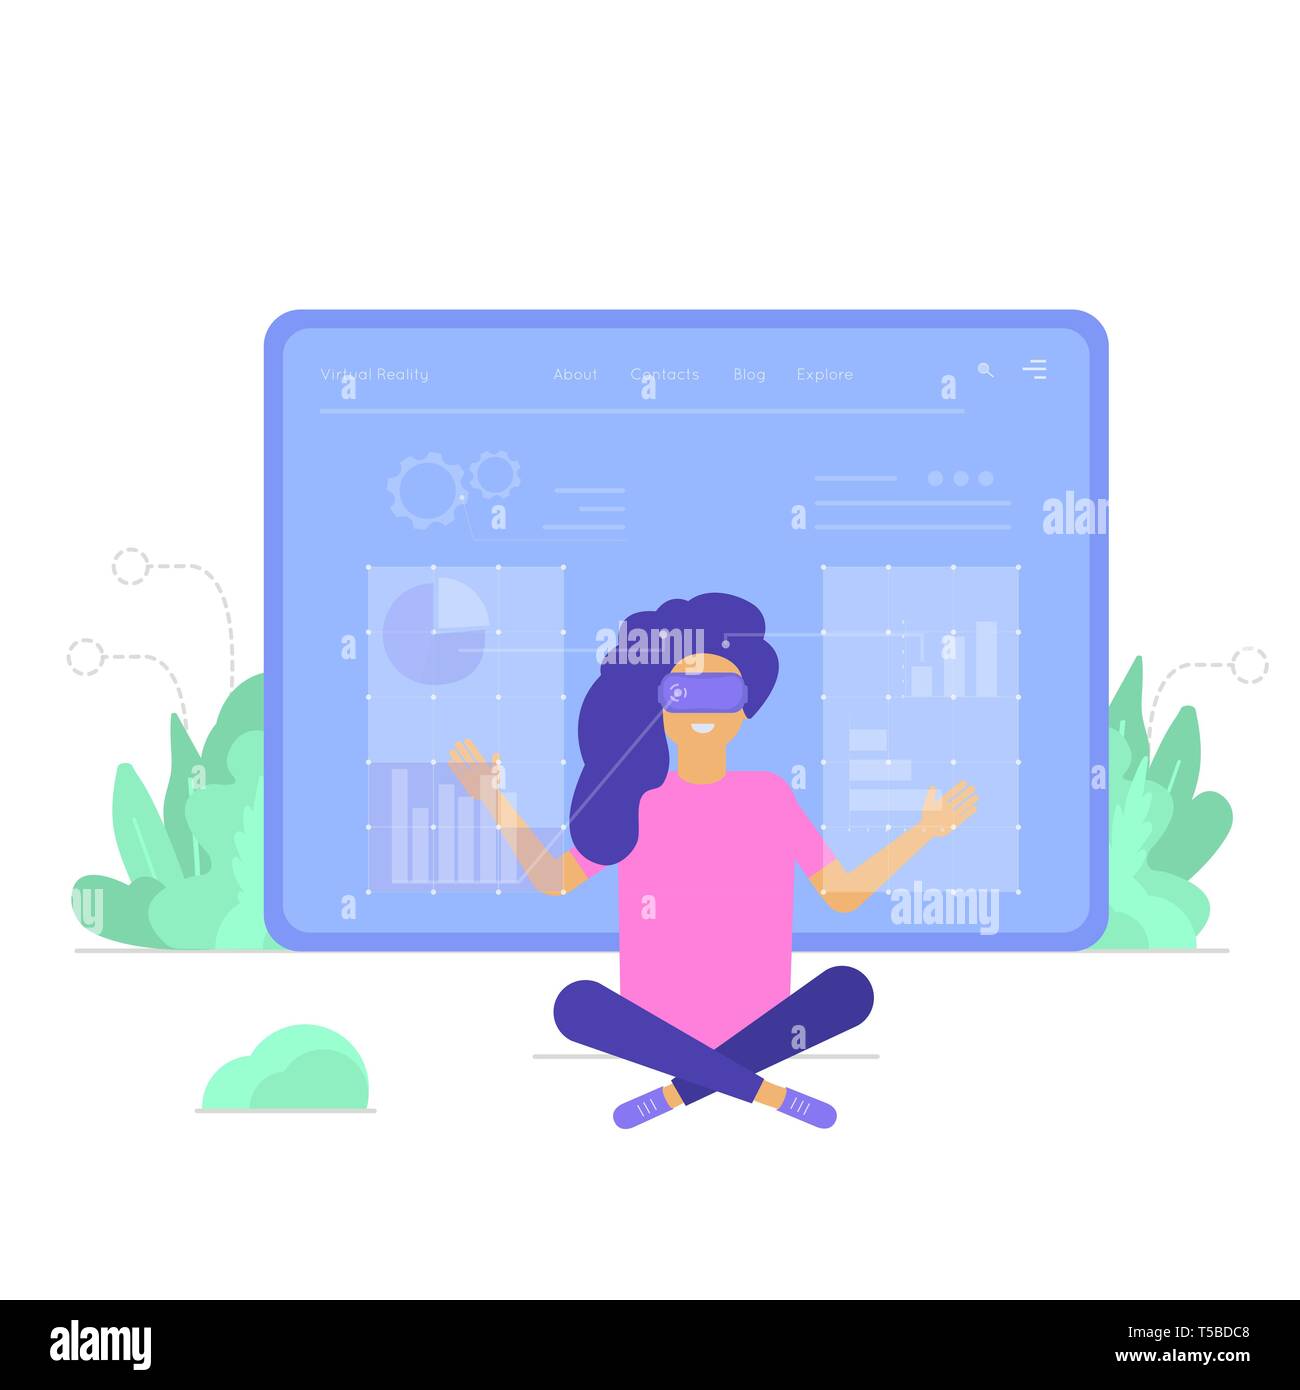 Virtual reality concept for landing page design with character of woman wearing goggle headset and touching vr interface, learning and interacting wit Stock Vector